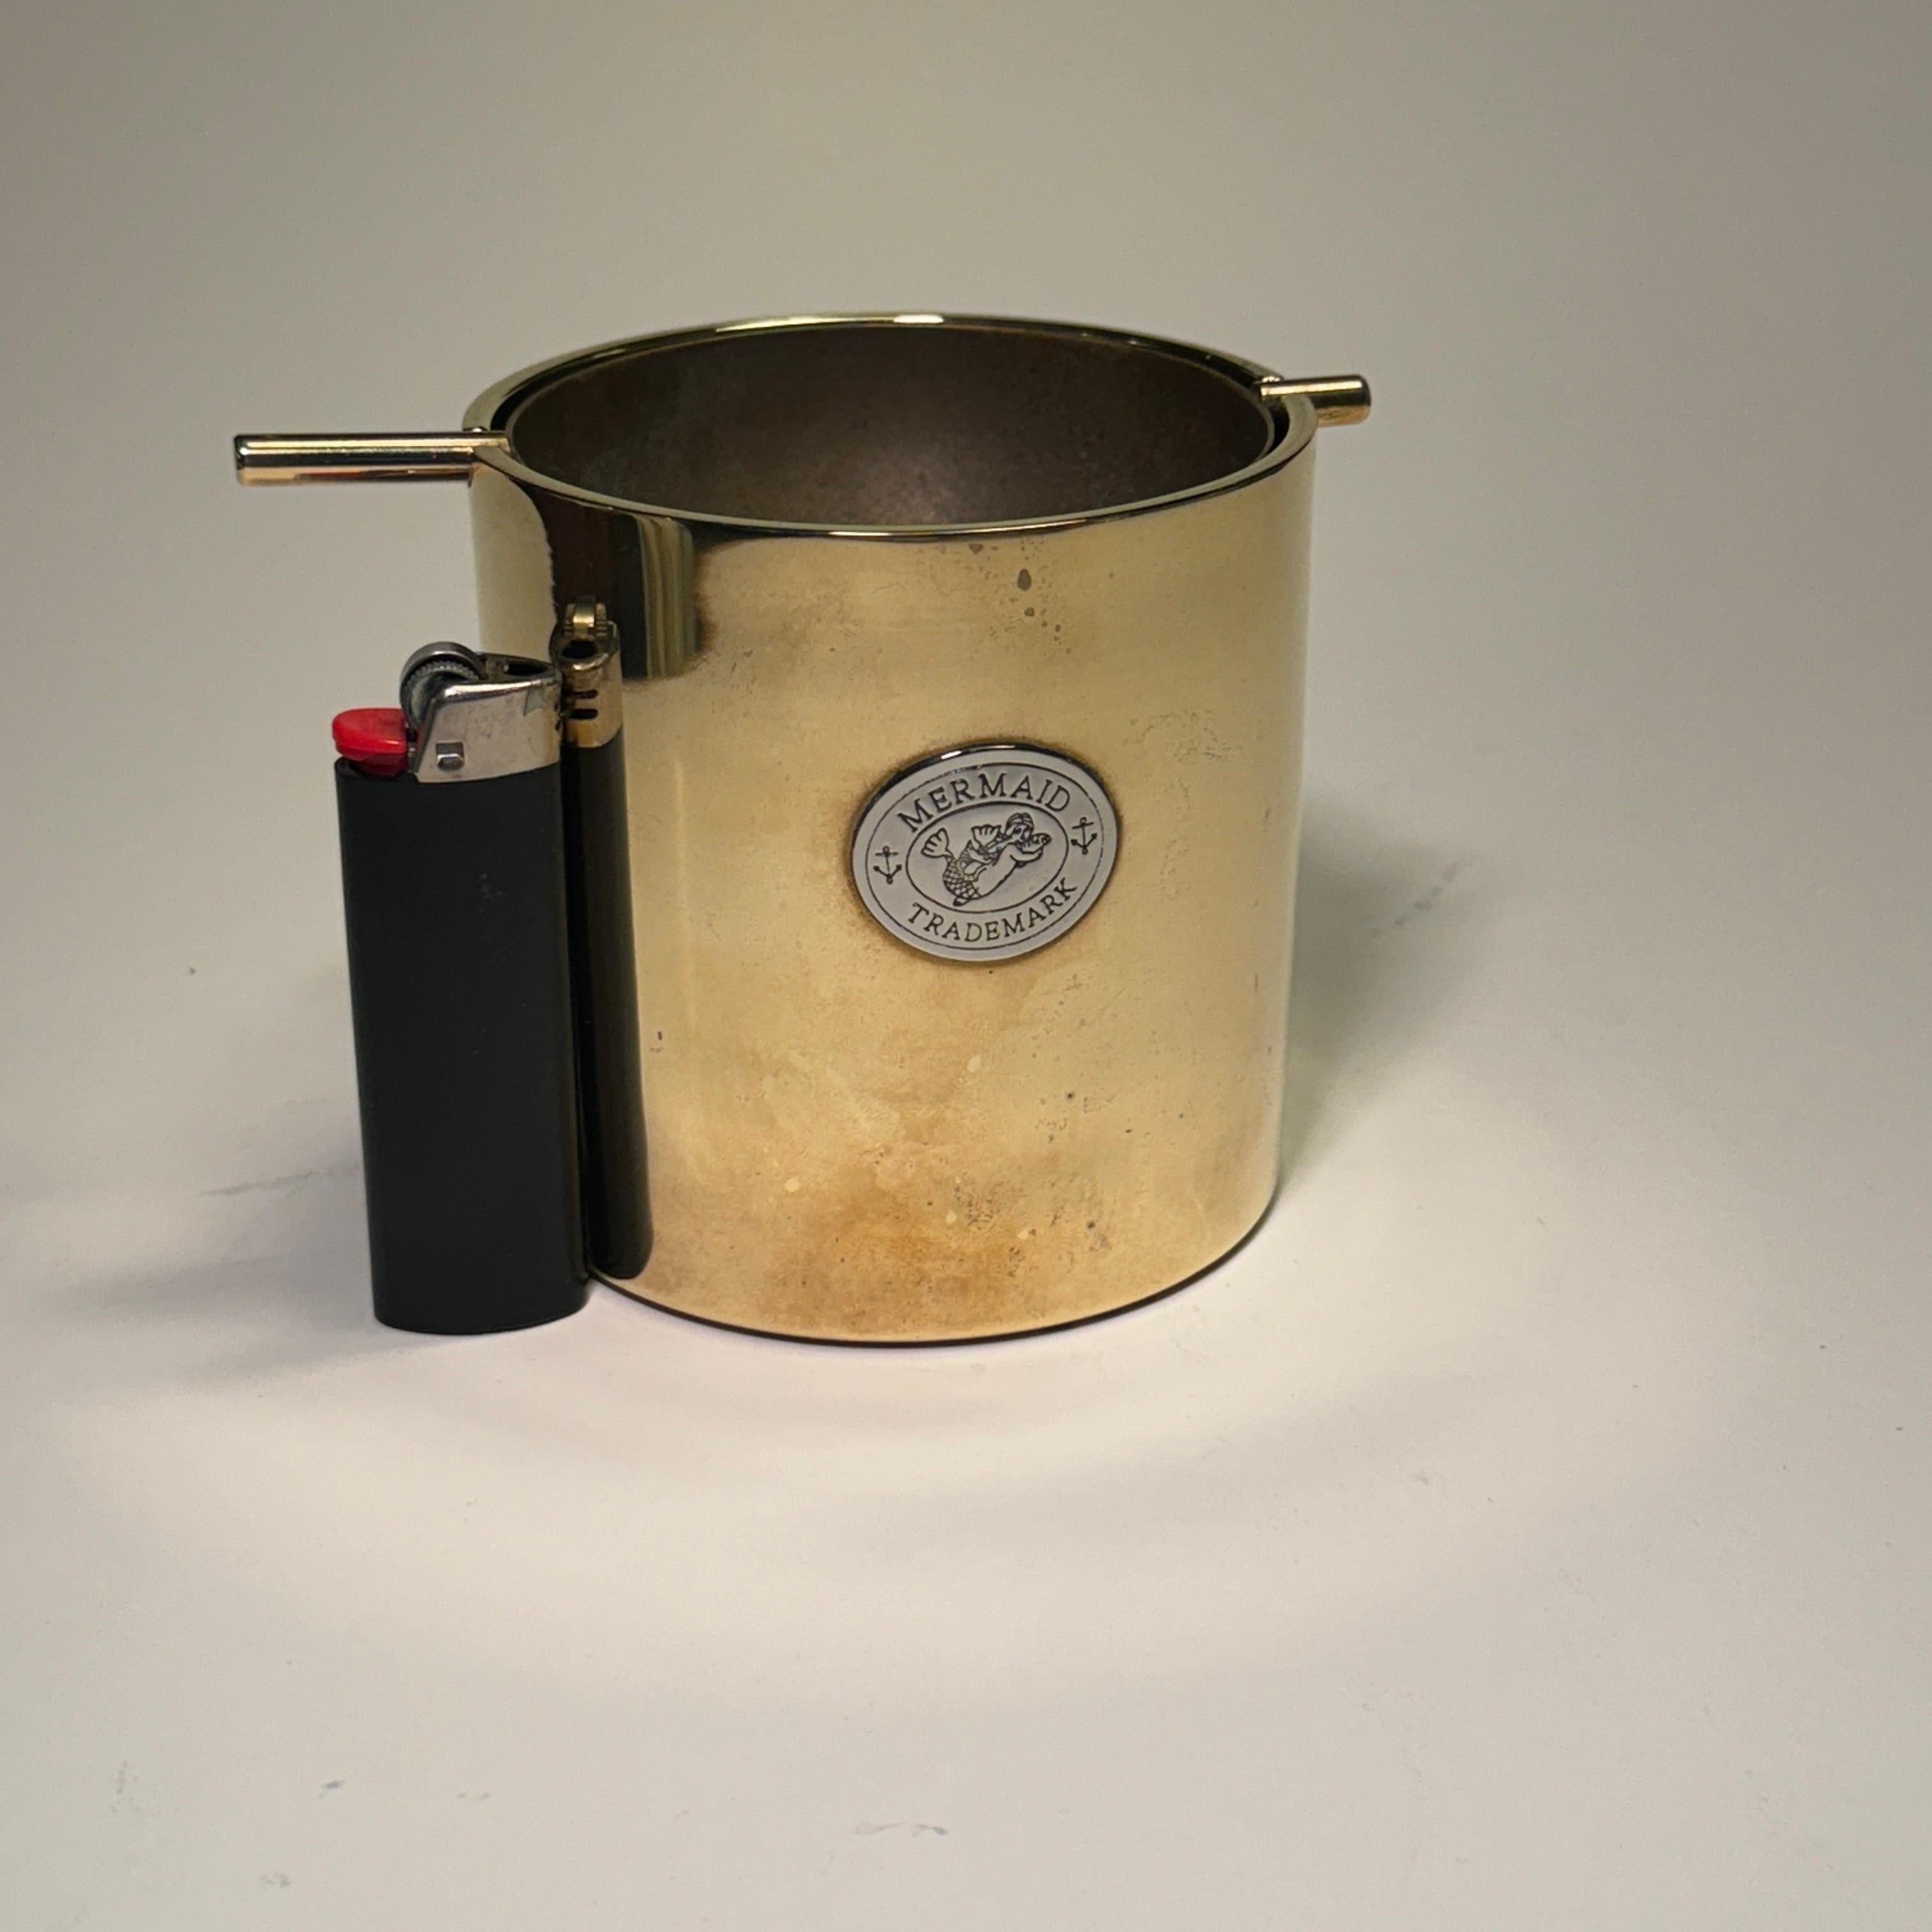 Tall Thick Solid Brass Ashtray by Arne Jacobsen For Stelton, Denmark 1960's In Good Condition For Sale In Haddonfield, NJ